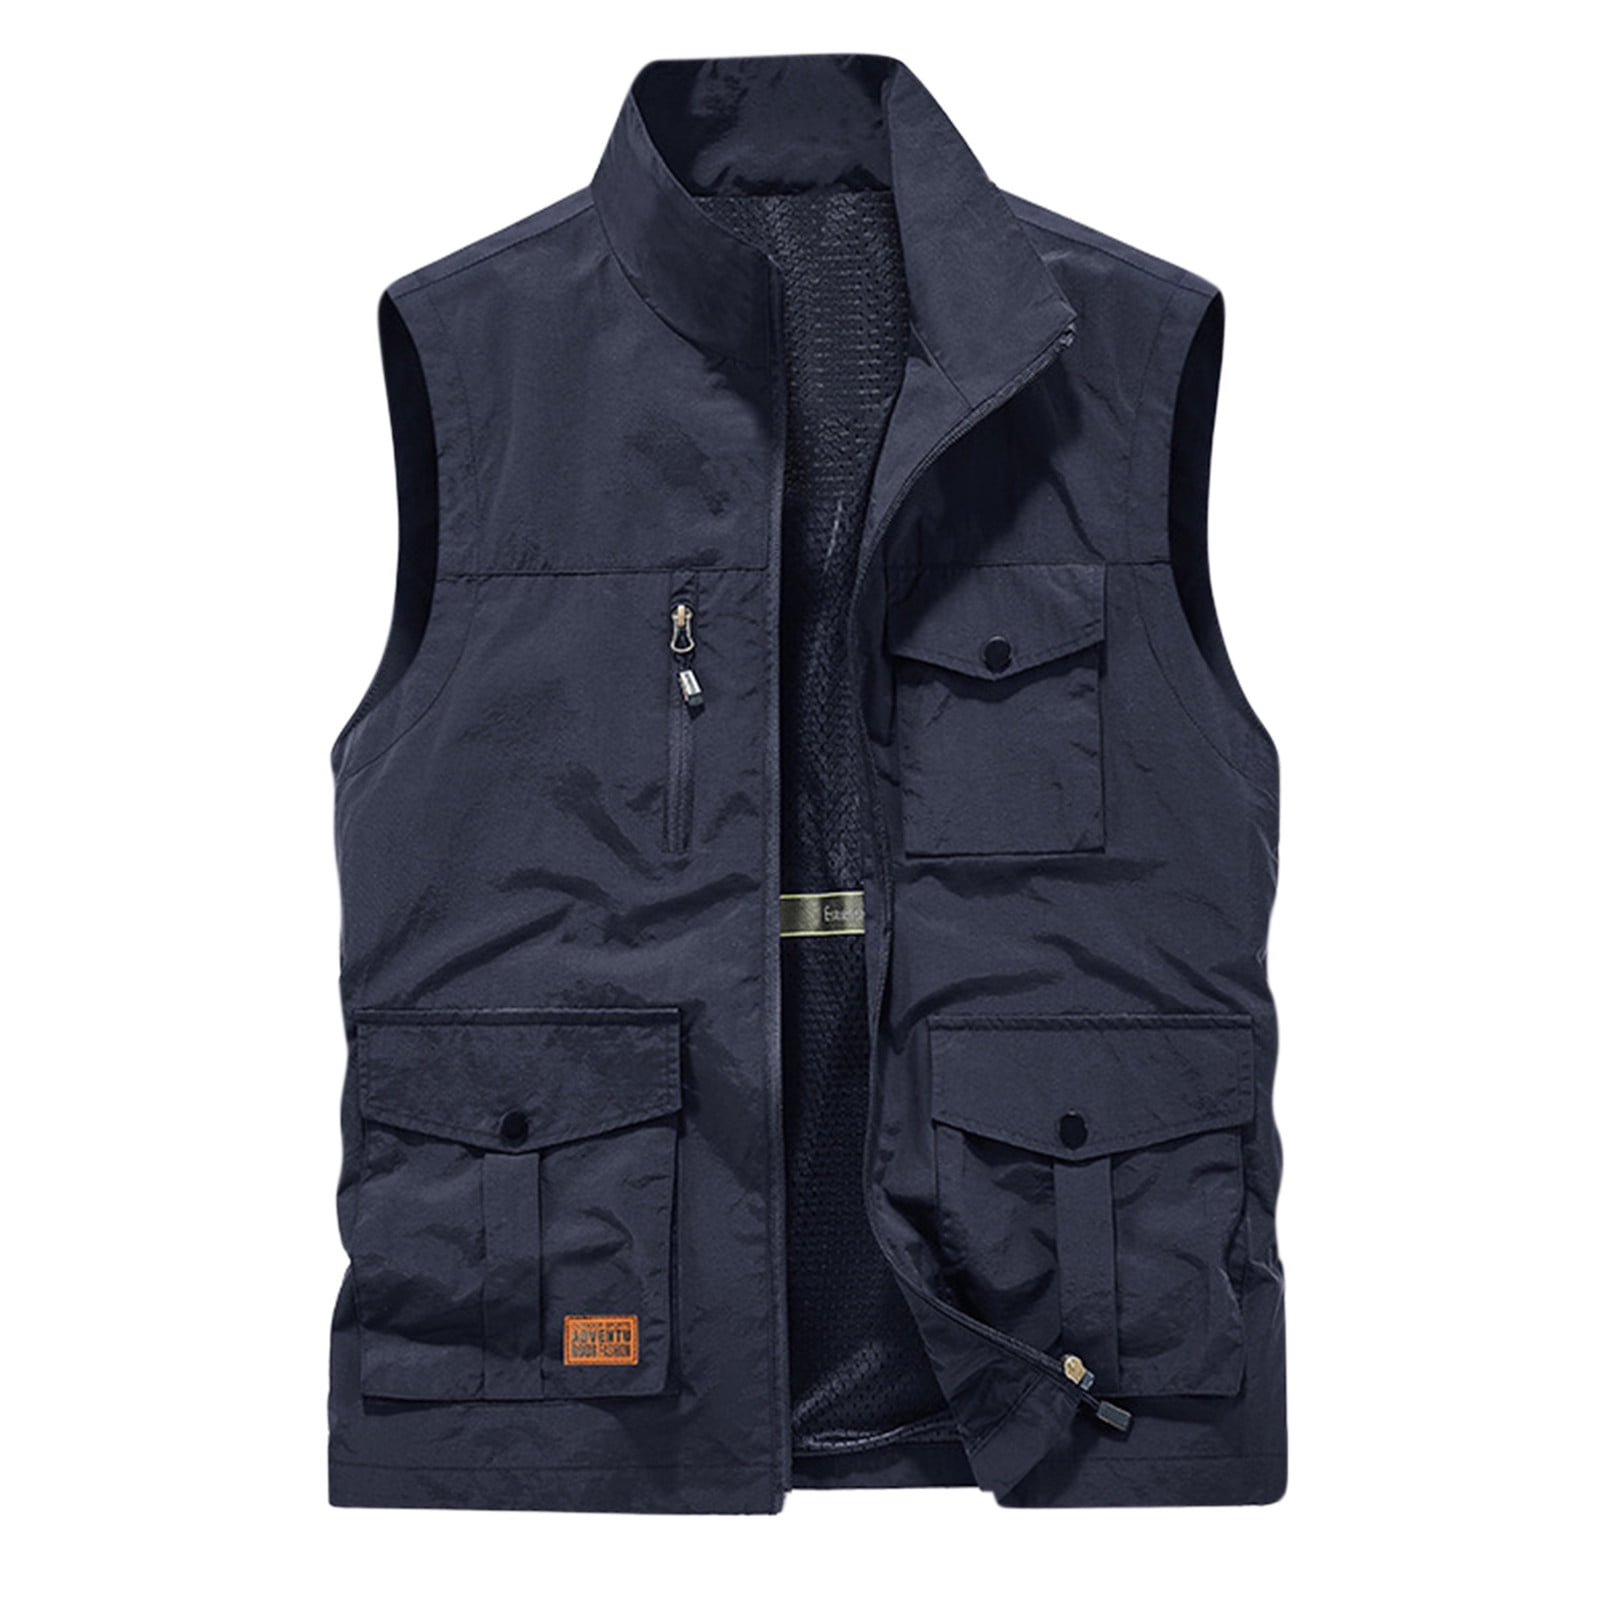 Wyongtao Hunting Vests for Men's Quick-drying Work Fishing Vests  Lightweight Travel Waistcoat with Multi-Pockets,Dark Blue XL